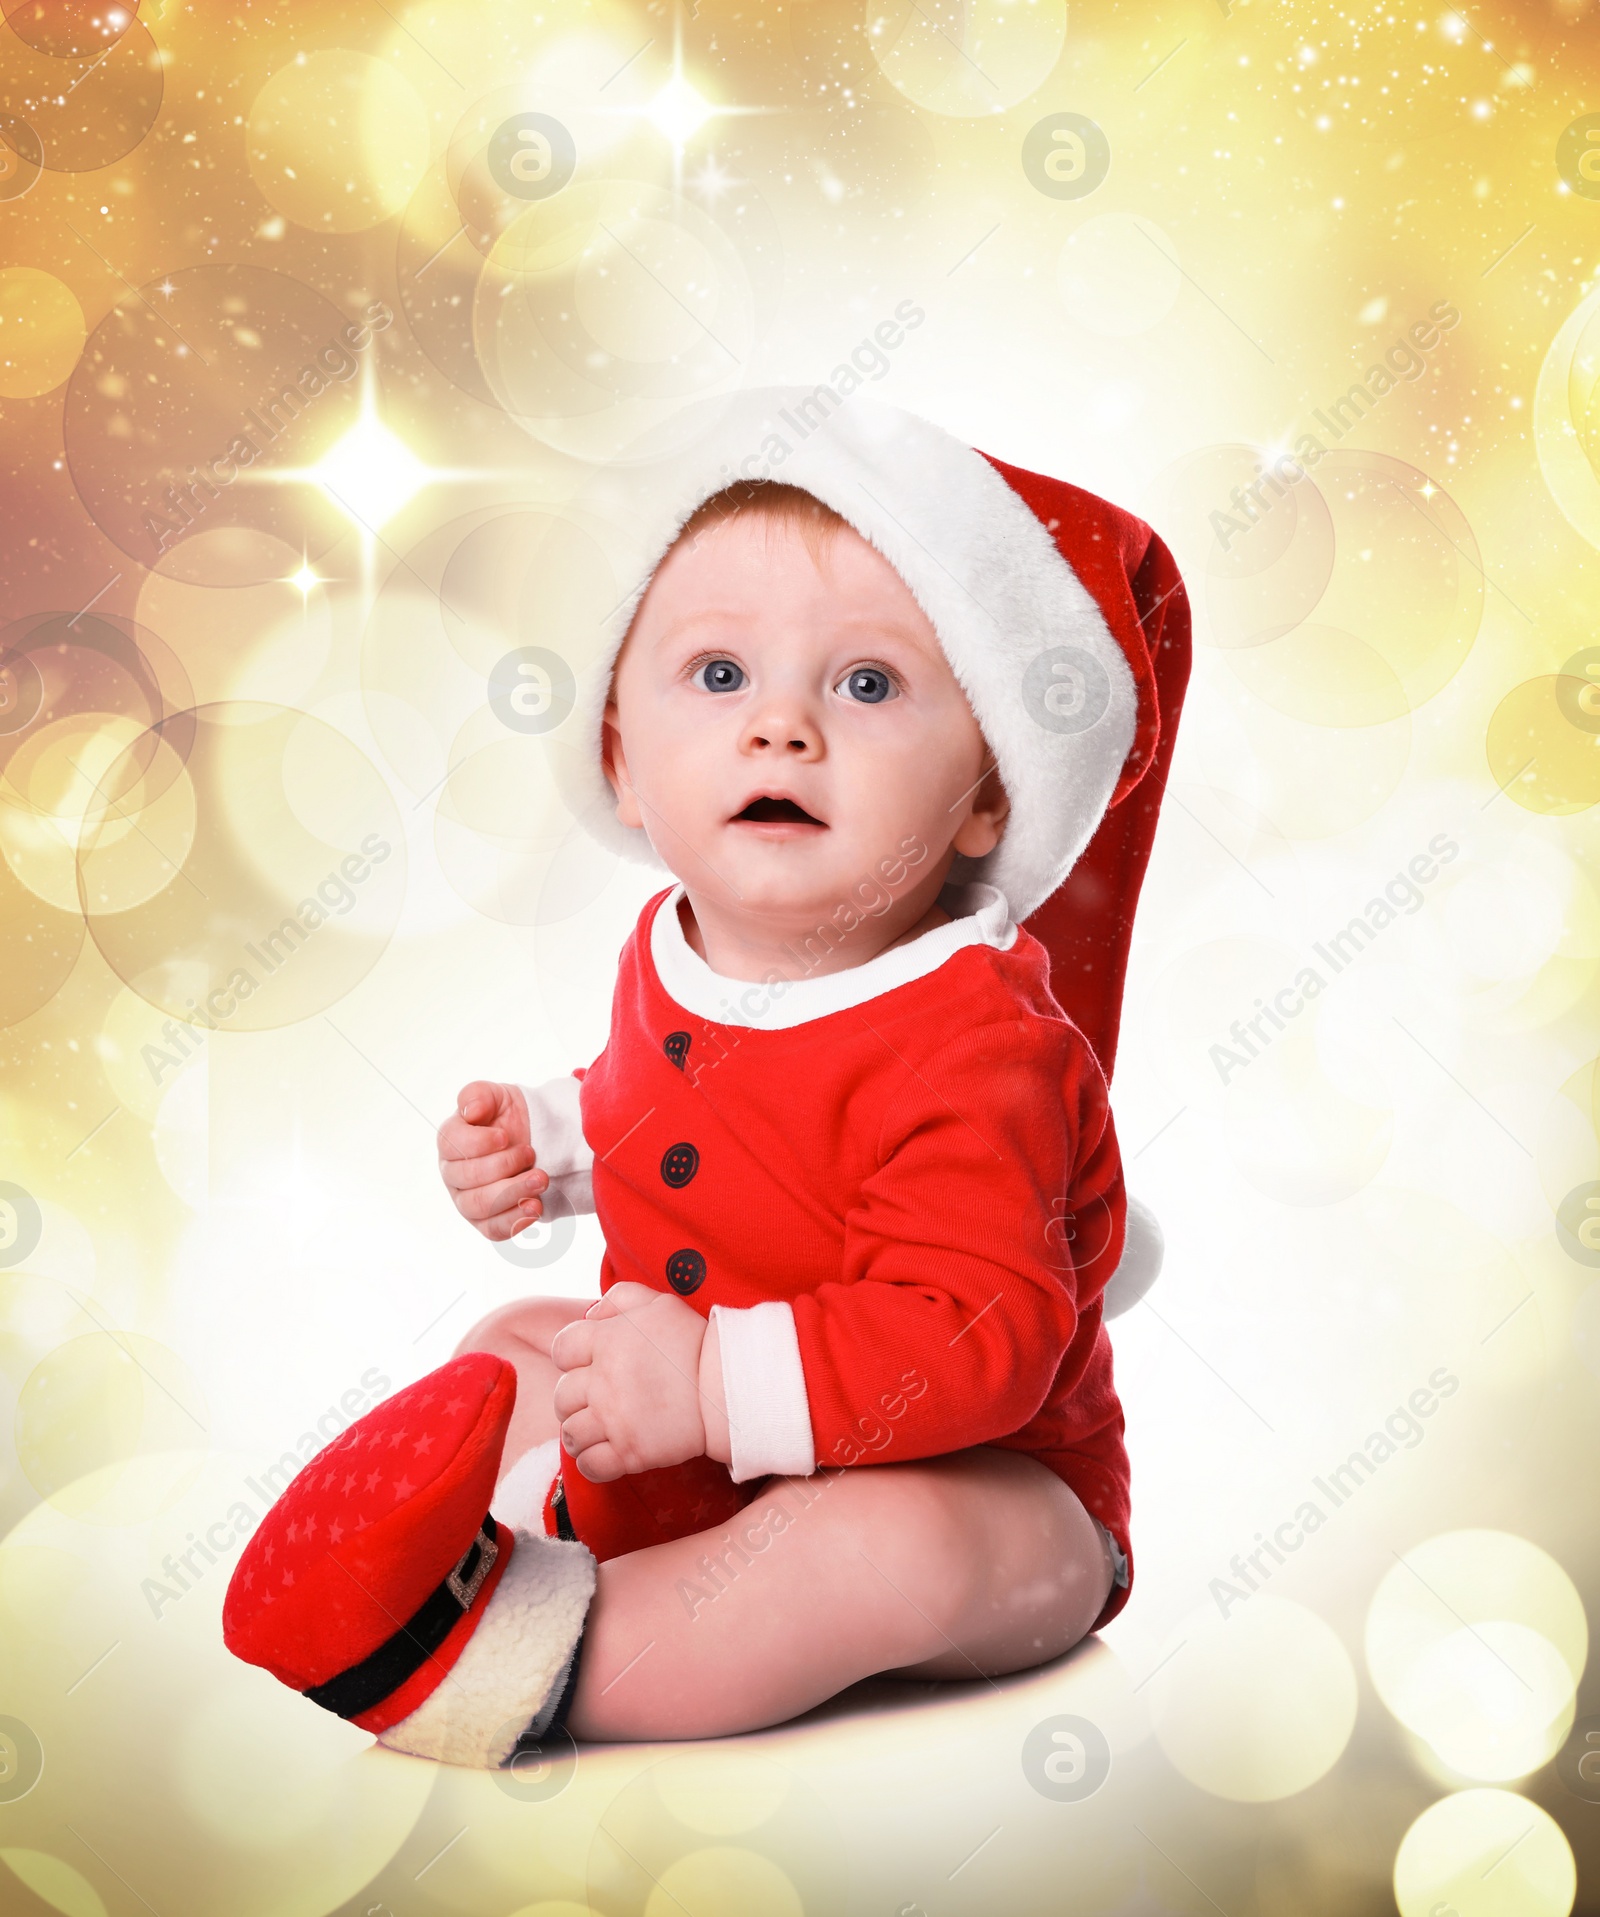 Image of Cute little baby in Santa Claus costume against blurred festive lights. Christmas celebration